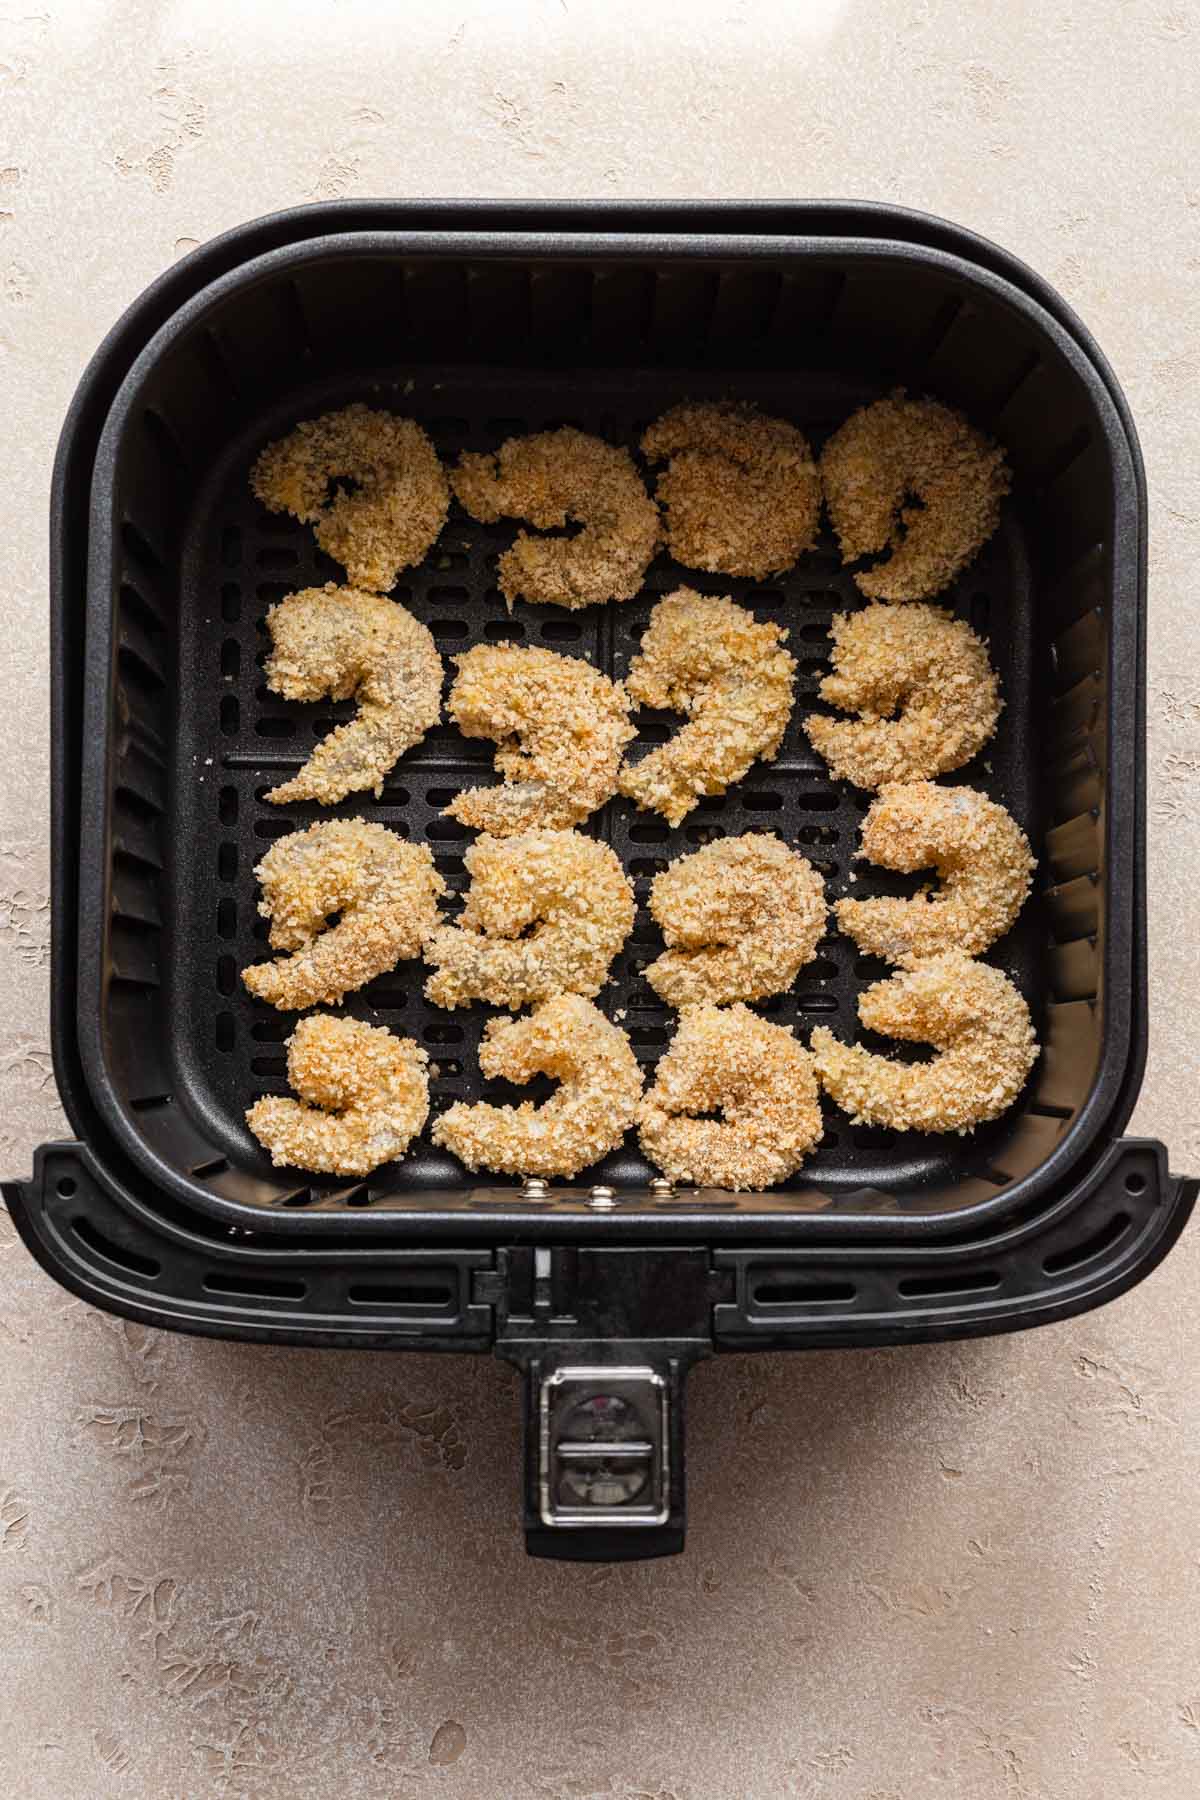 Overhead view of raw breaded shrimp in an air fryer basket.